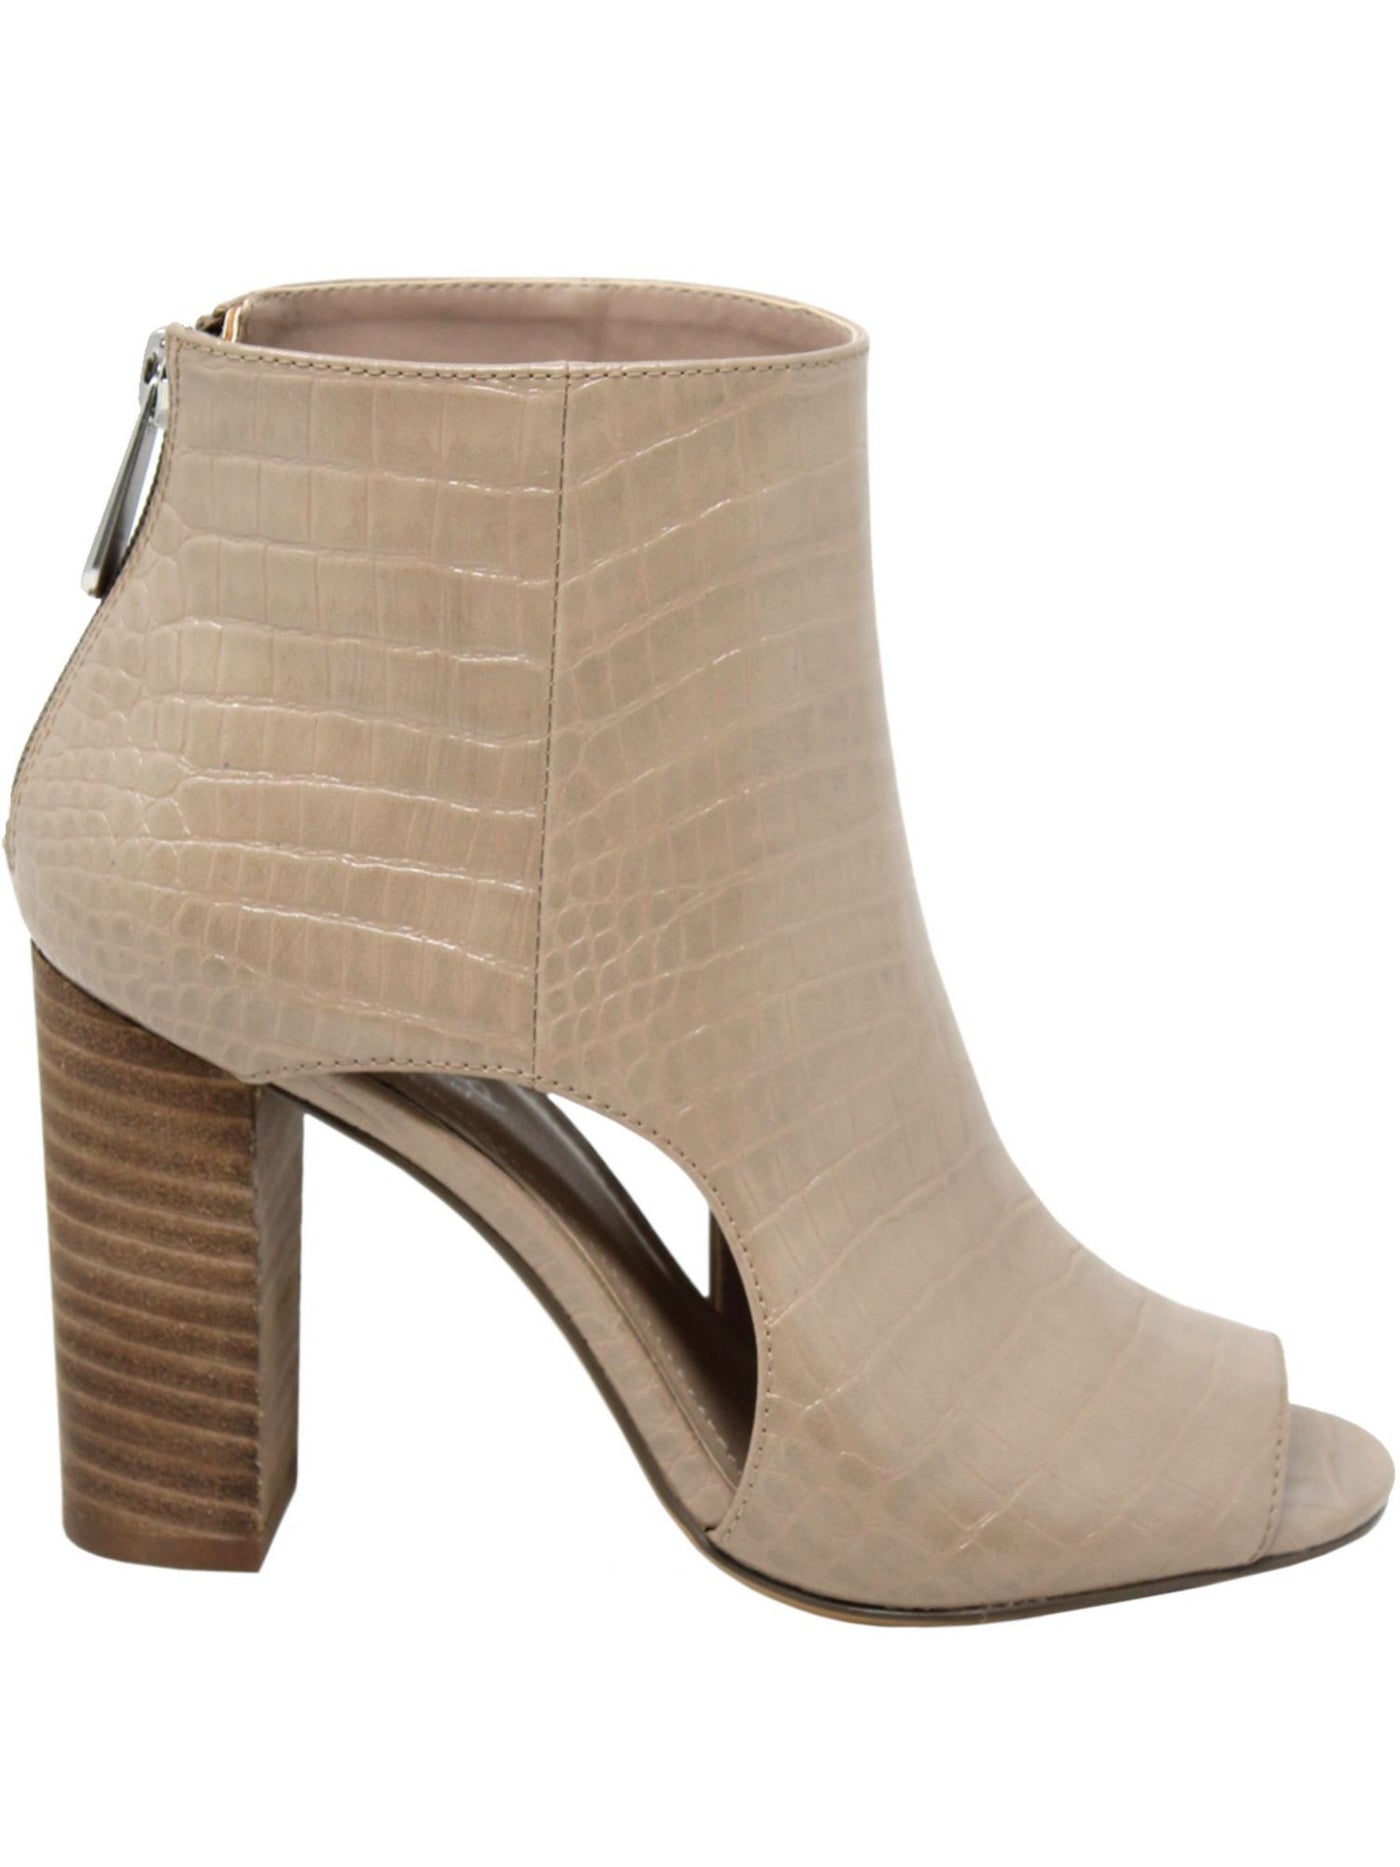 CHARLES BY CHARLES DAVID Womens Beige Side Cutouts Cushioned Fable Peep Toe Stacked Heel Zip-Up Dress Booties 6.5